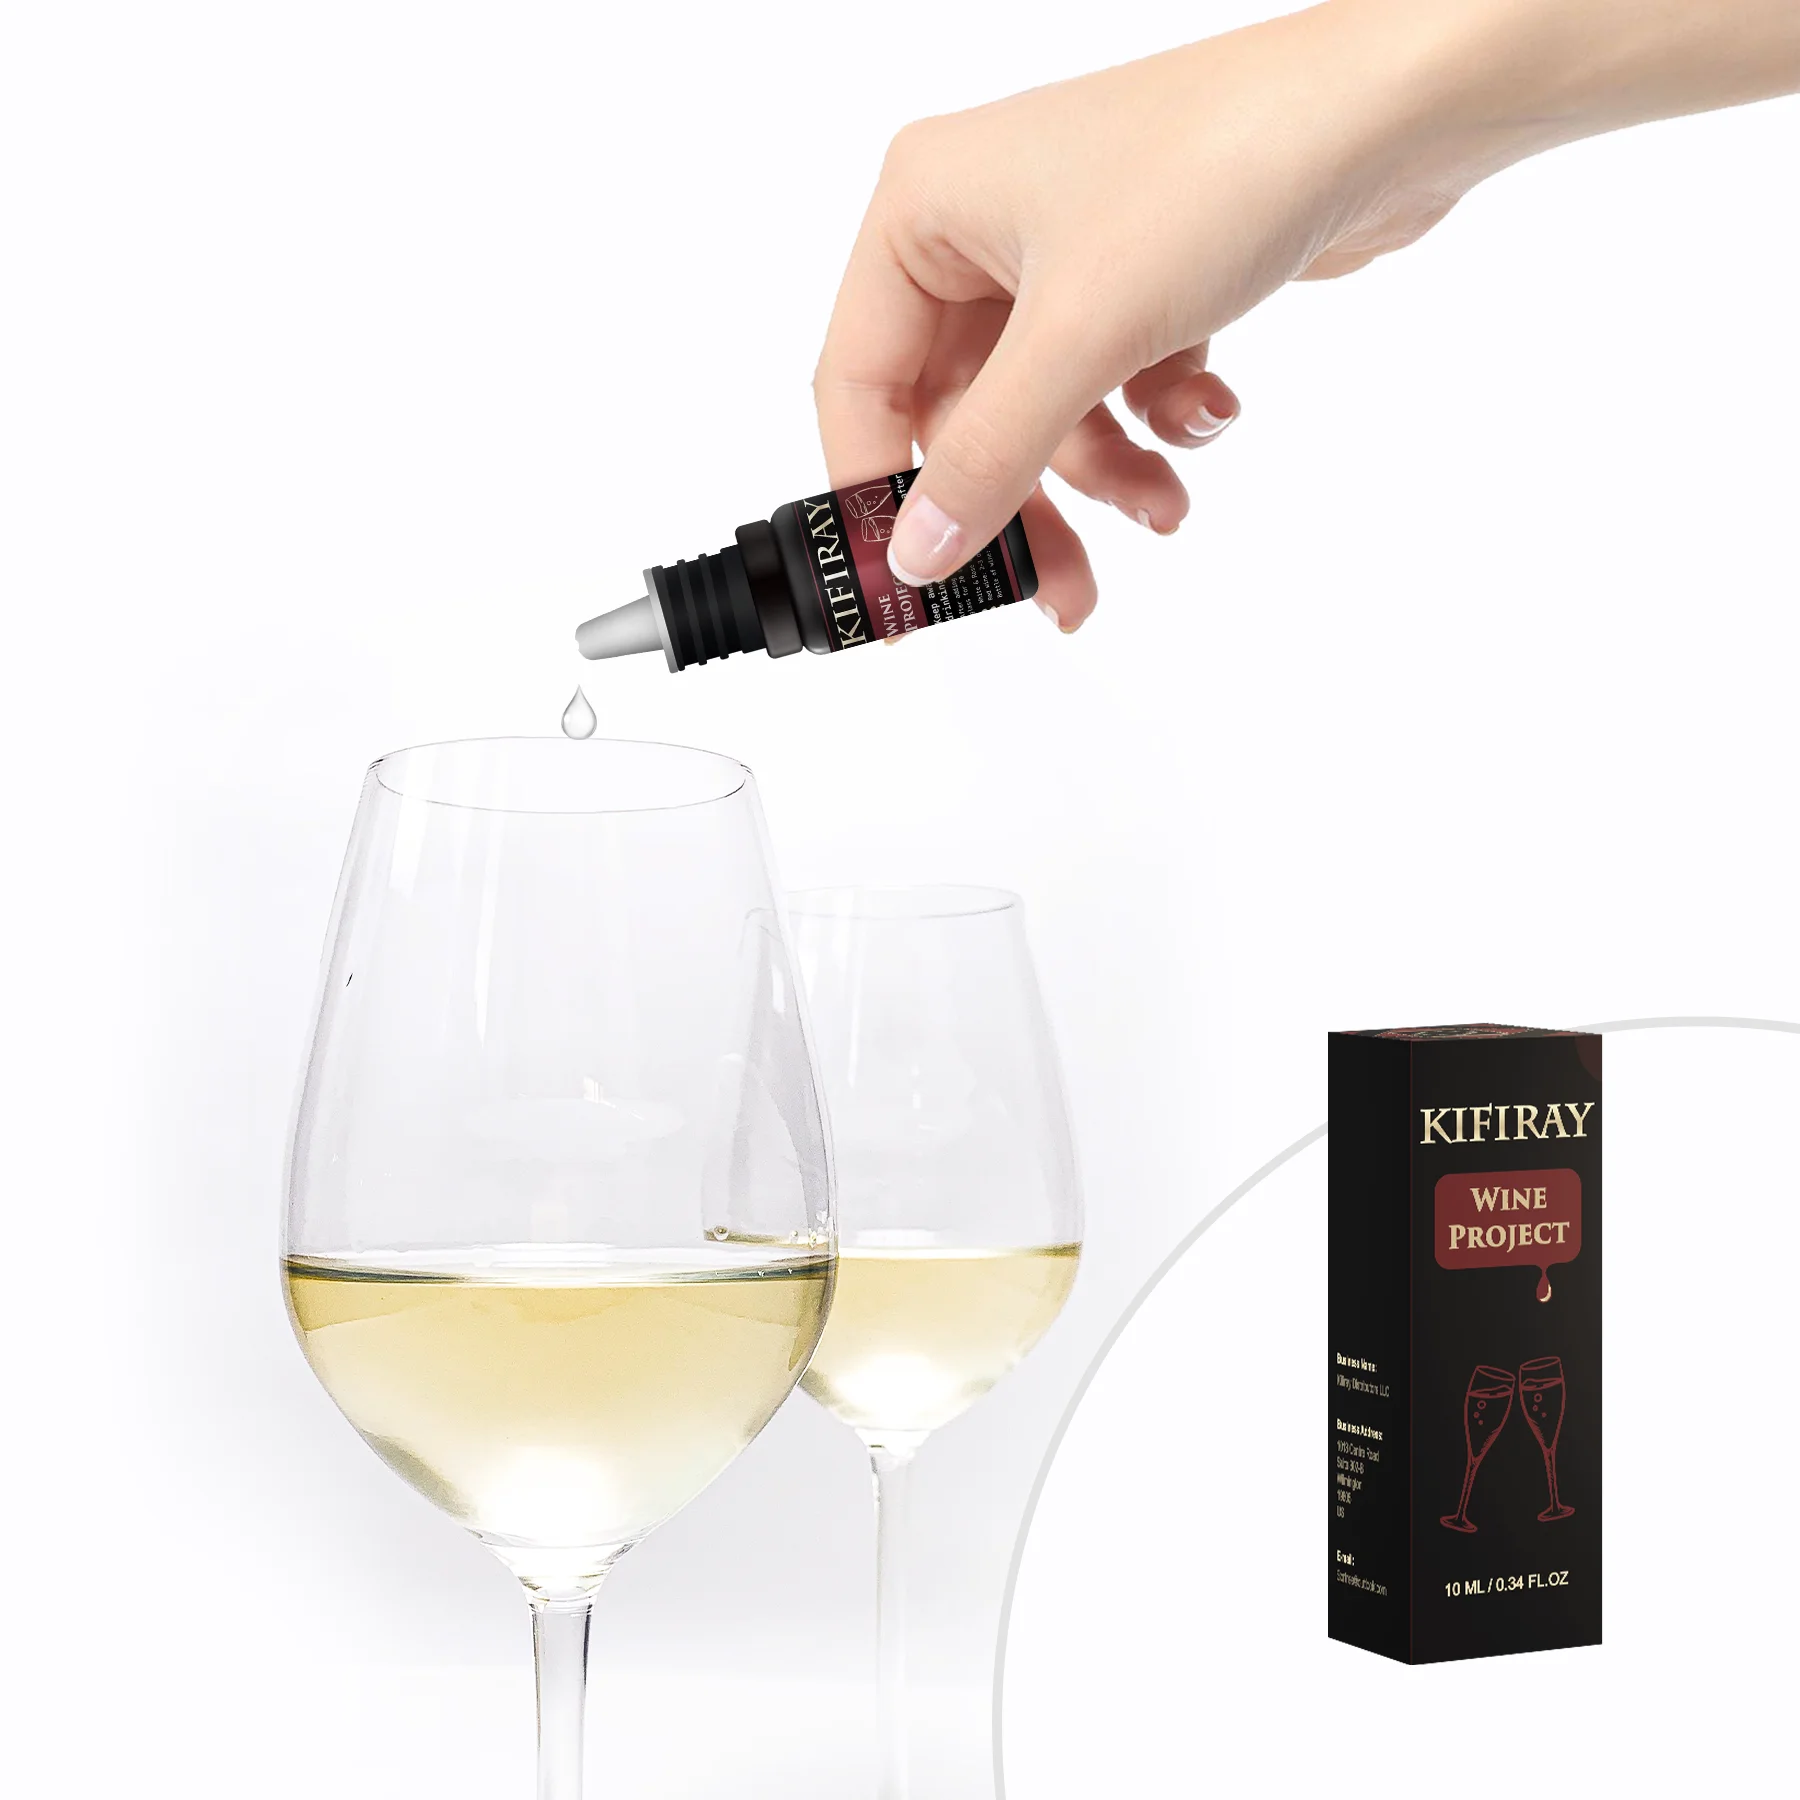 

Kifireay wine drops, remove sulfites and histamines from wine, stay away from headaches and allergies